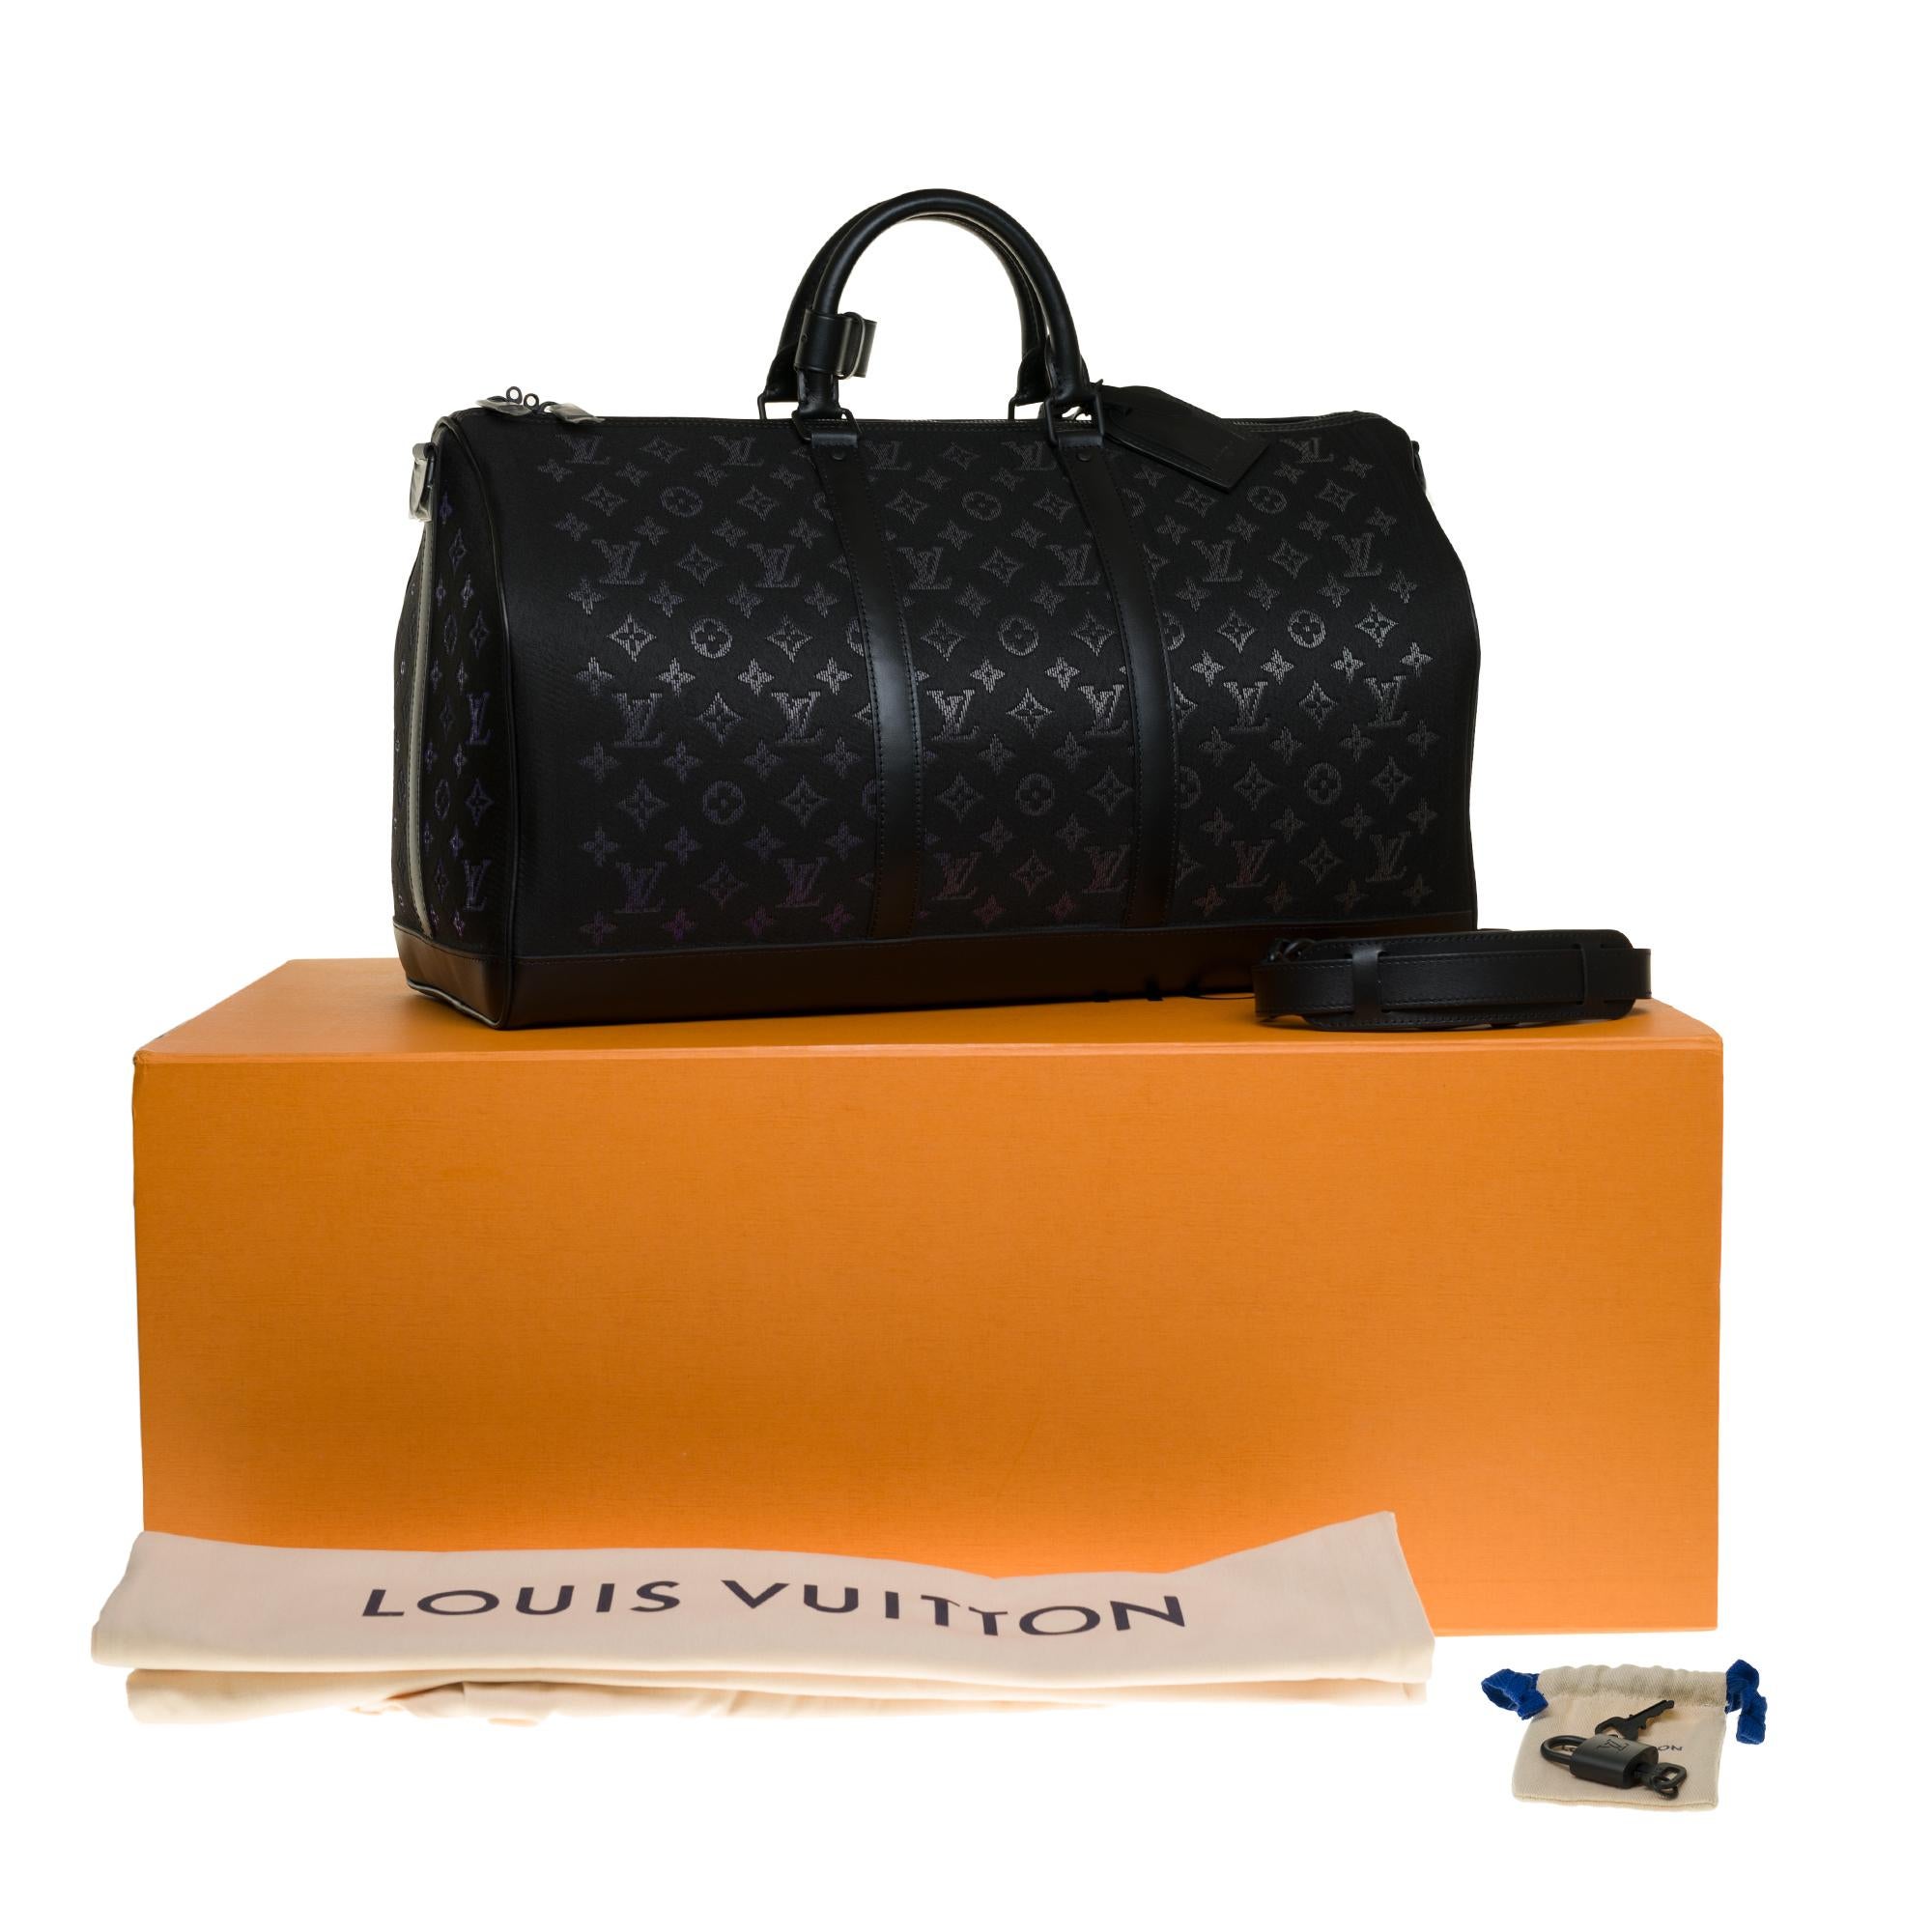 BRAND NEW-Limited edition Louis Vuitton keepall 50 Light Up virgil abloh fw19 7